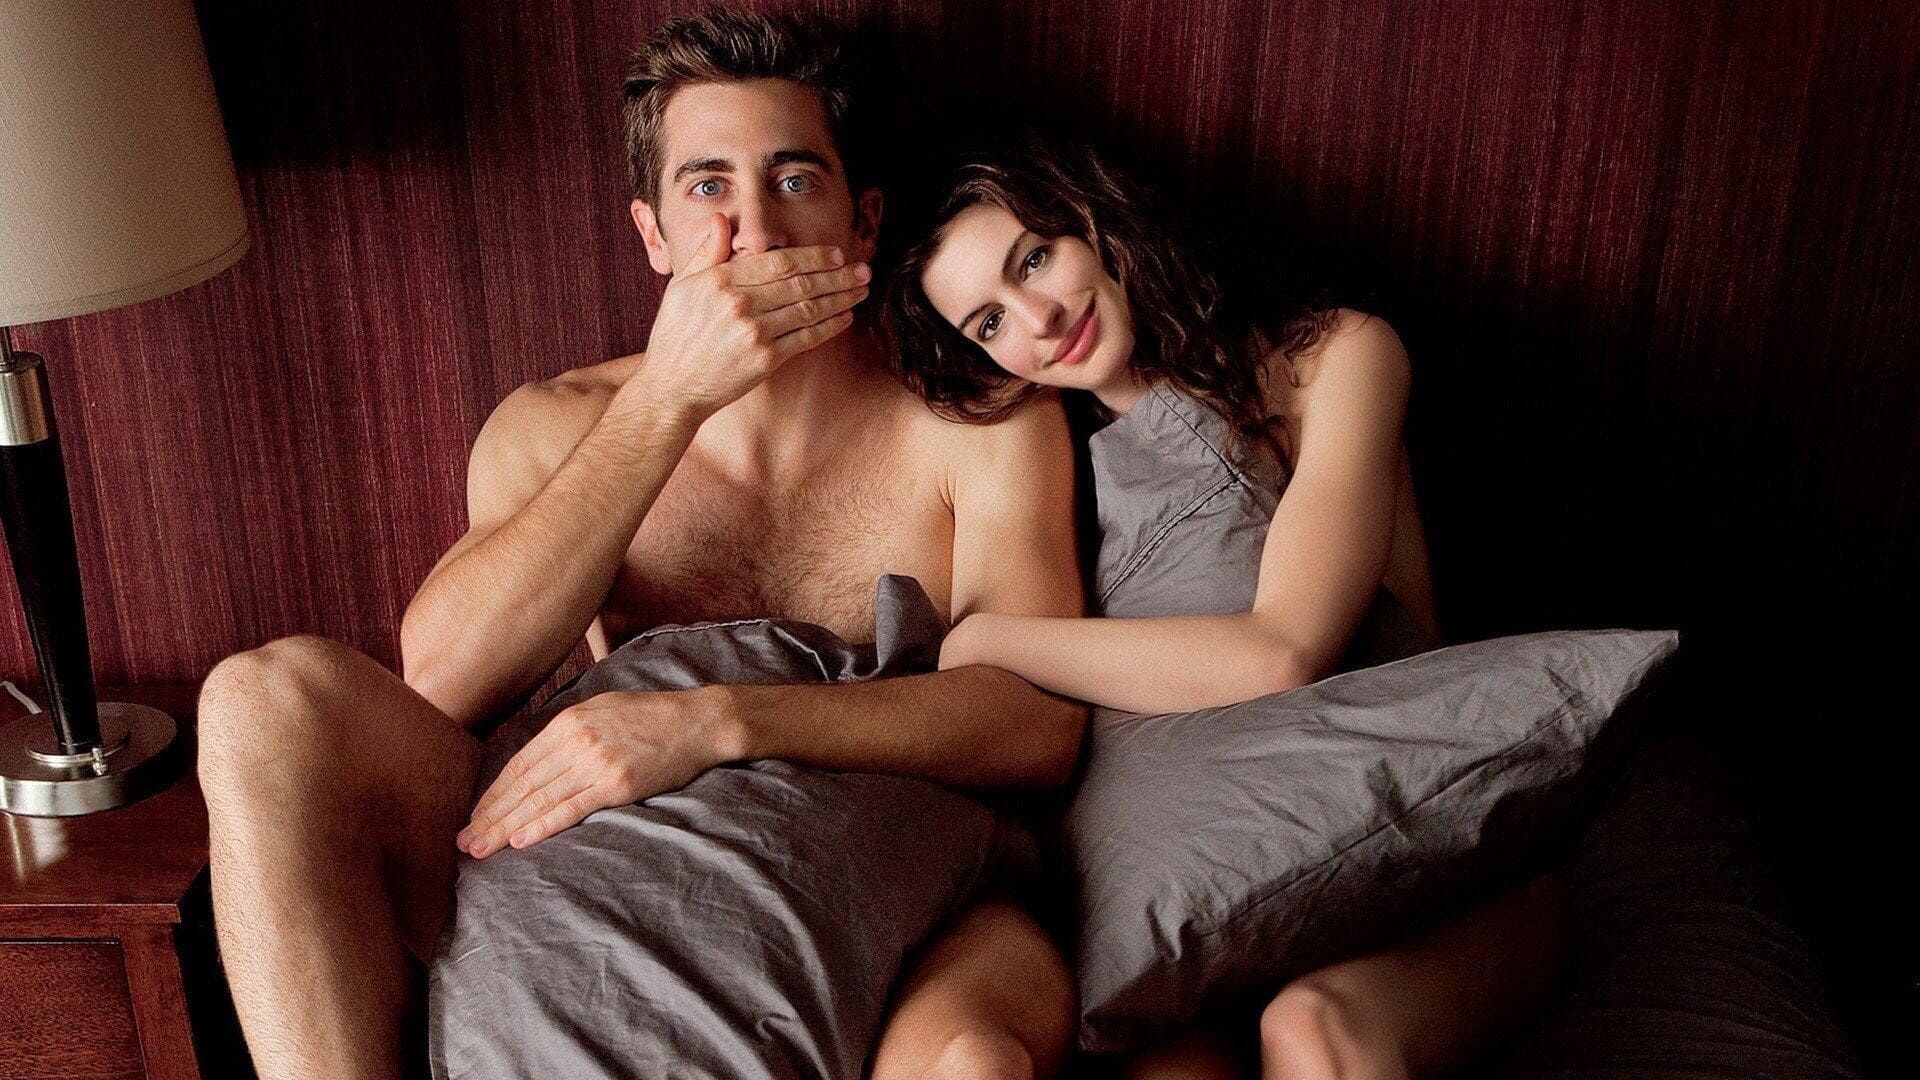 Love & Other Drugs Backdrop